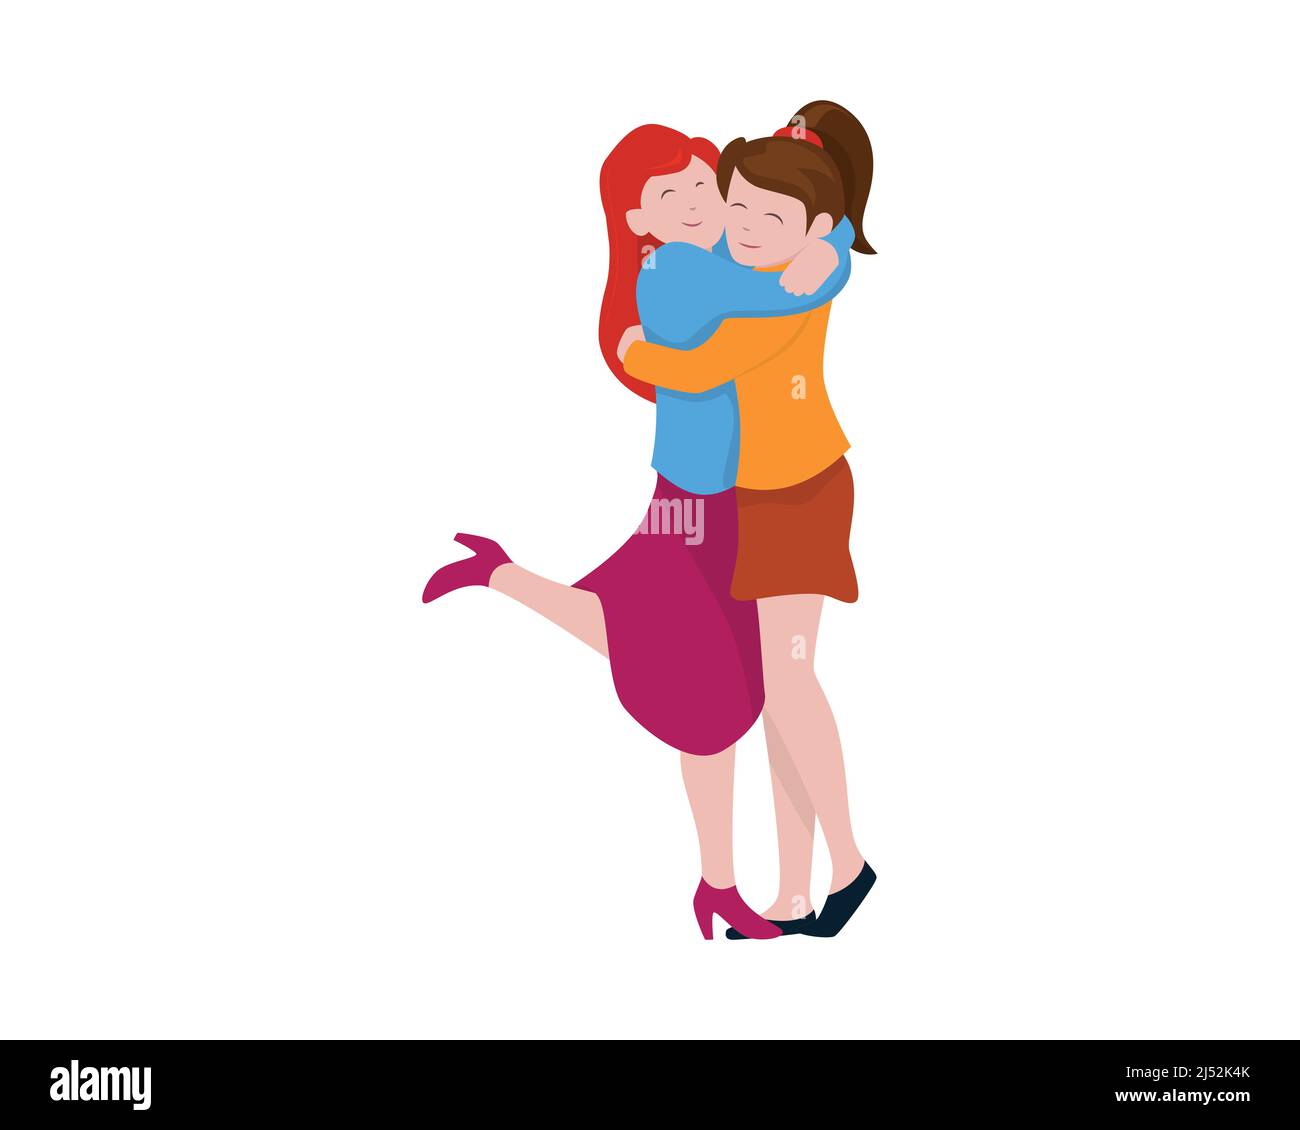 a Girl's Giving Warm Hug to Her Friend Illustration Vector Stock Vector